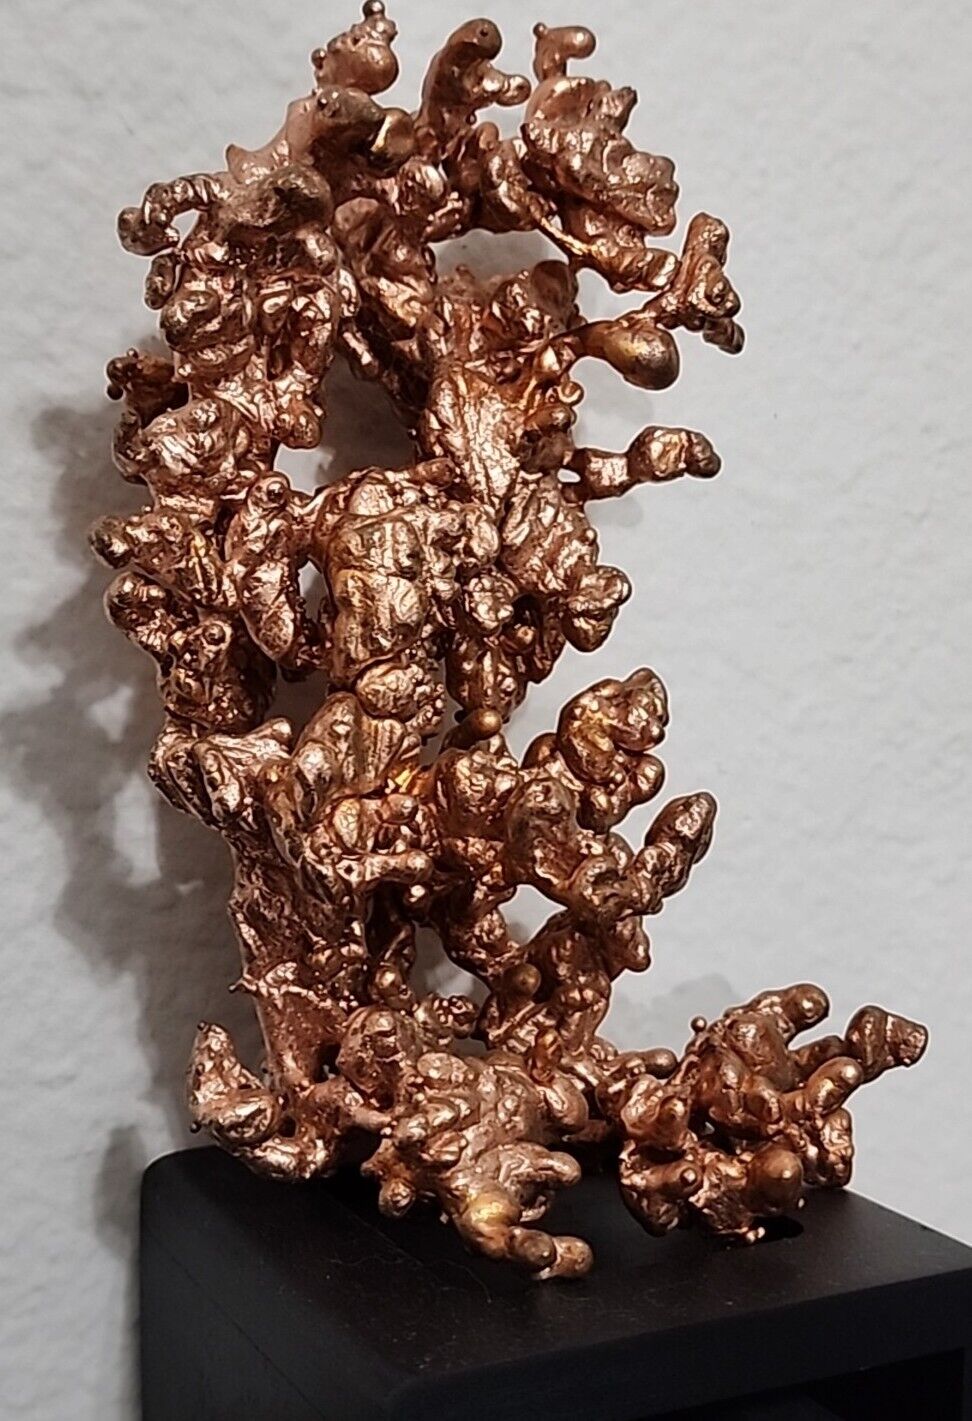 Stunning Natural Copper Mineral Display (Straw Copper)